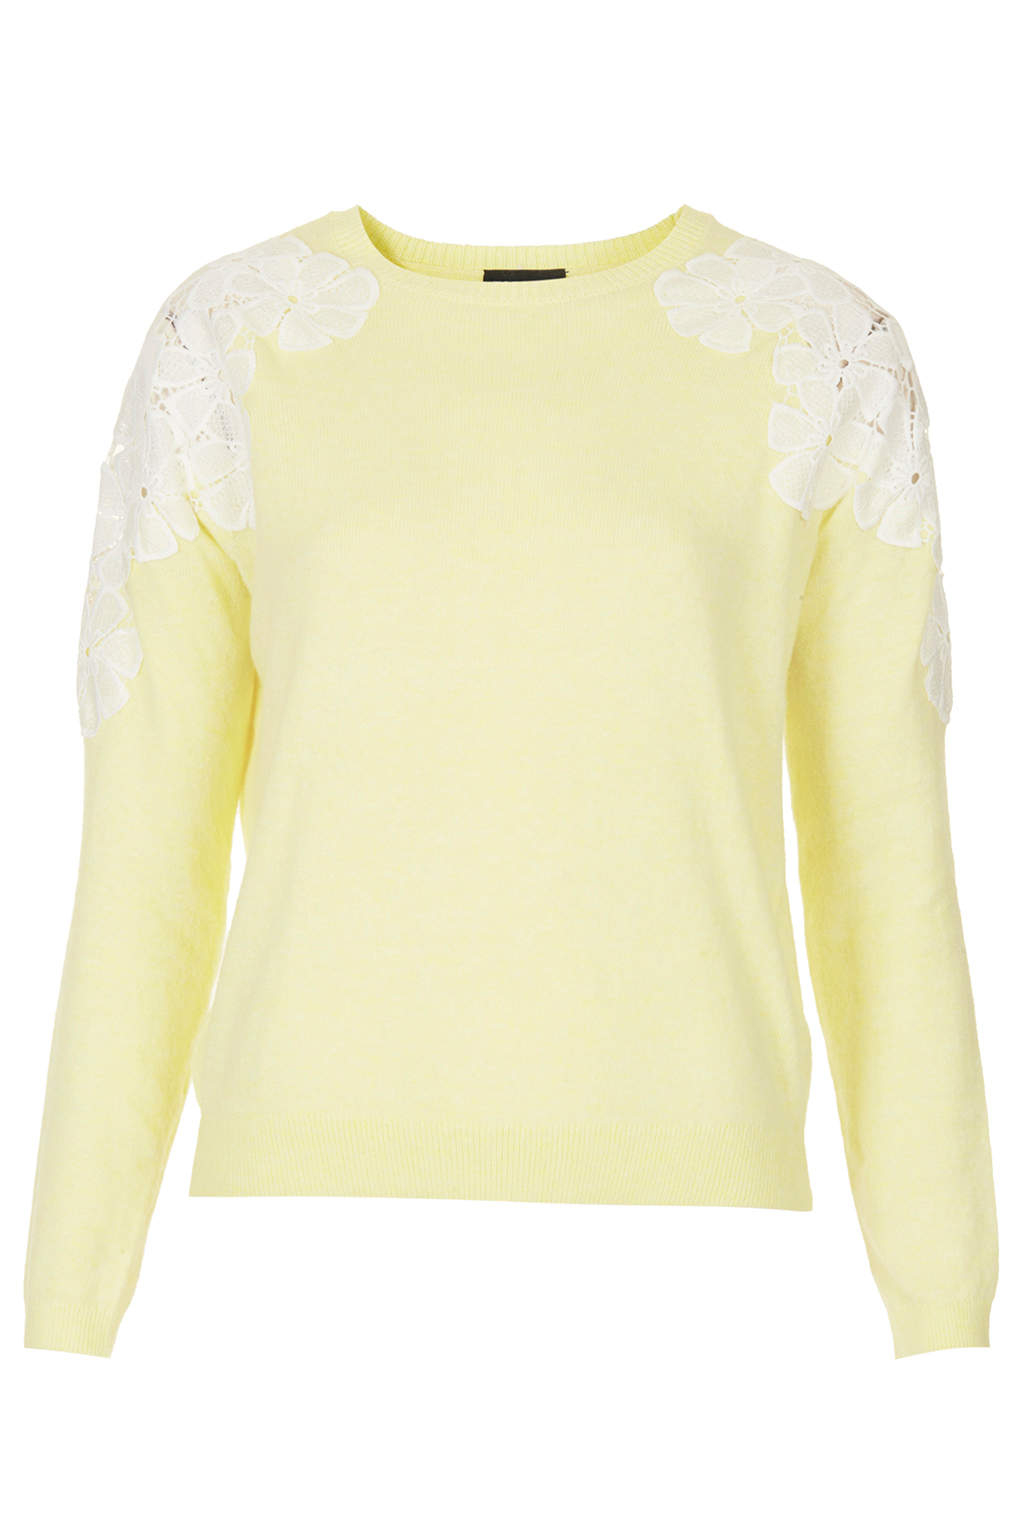 Topshop Knitted Lace Shoulder Jumper in Yellow (LEMON) | Lyst